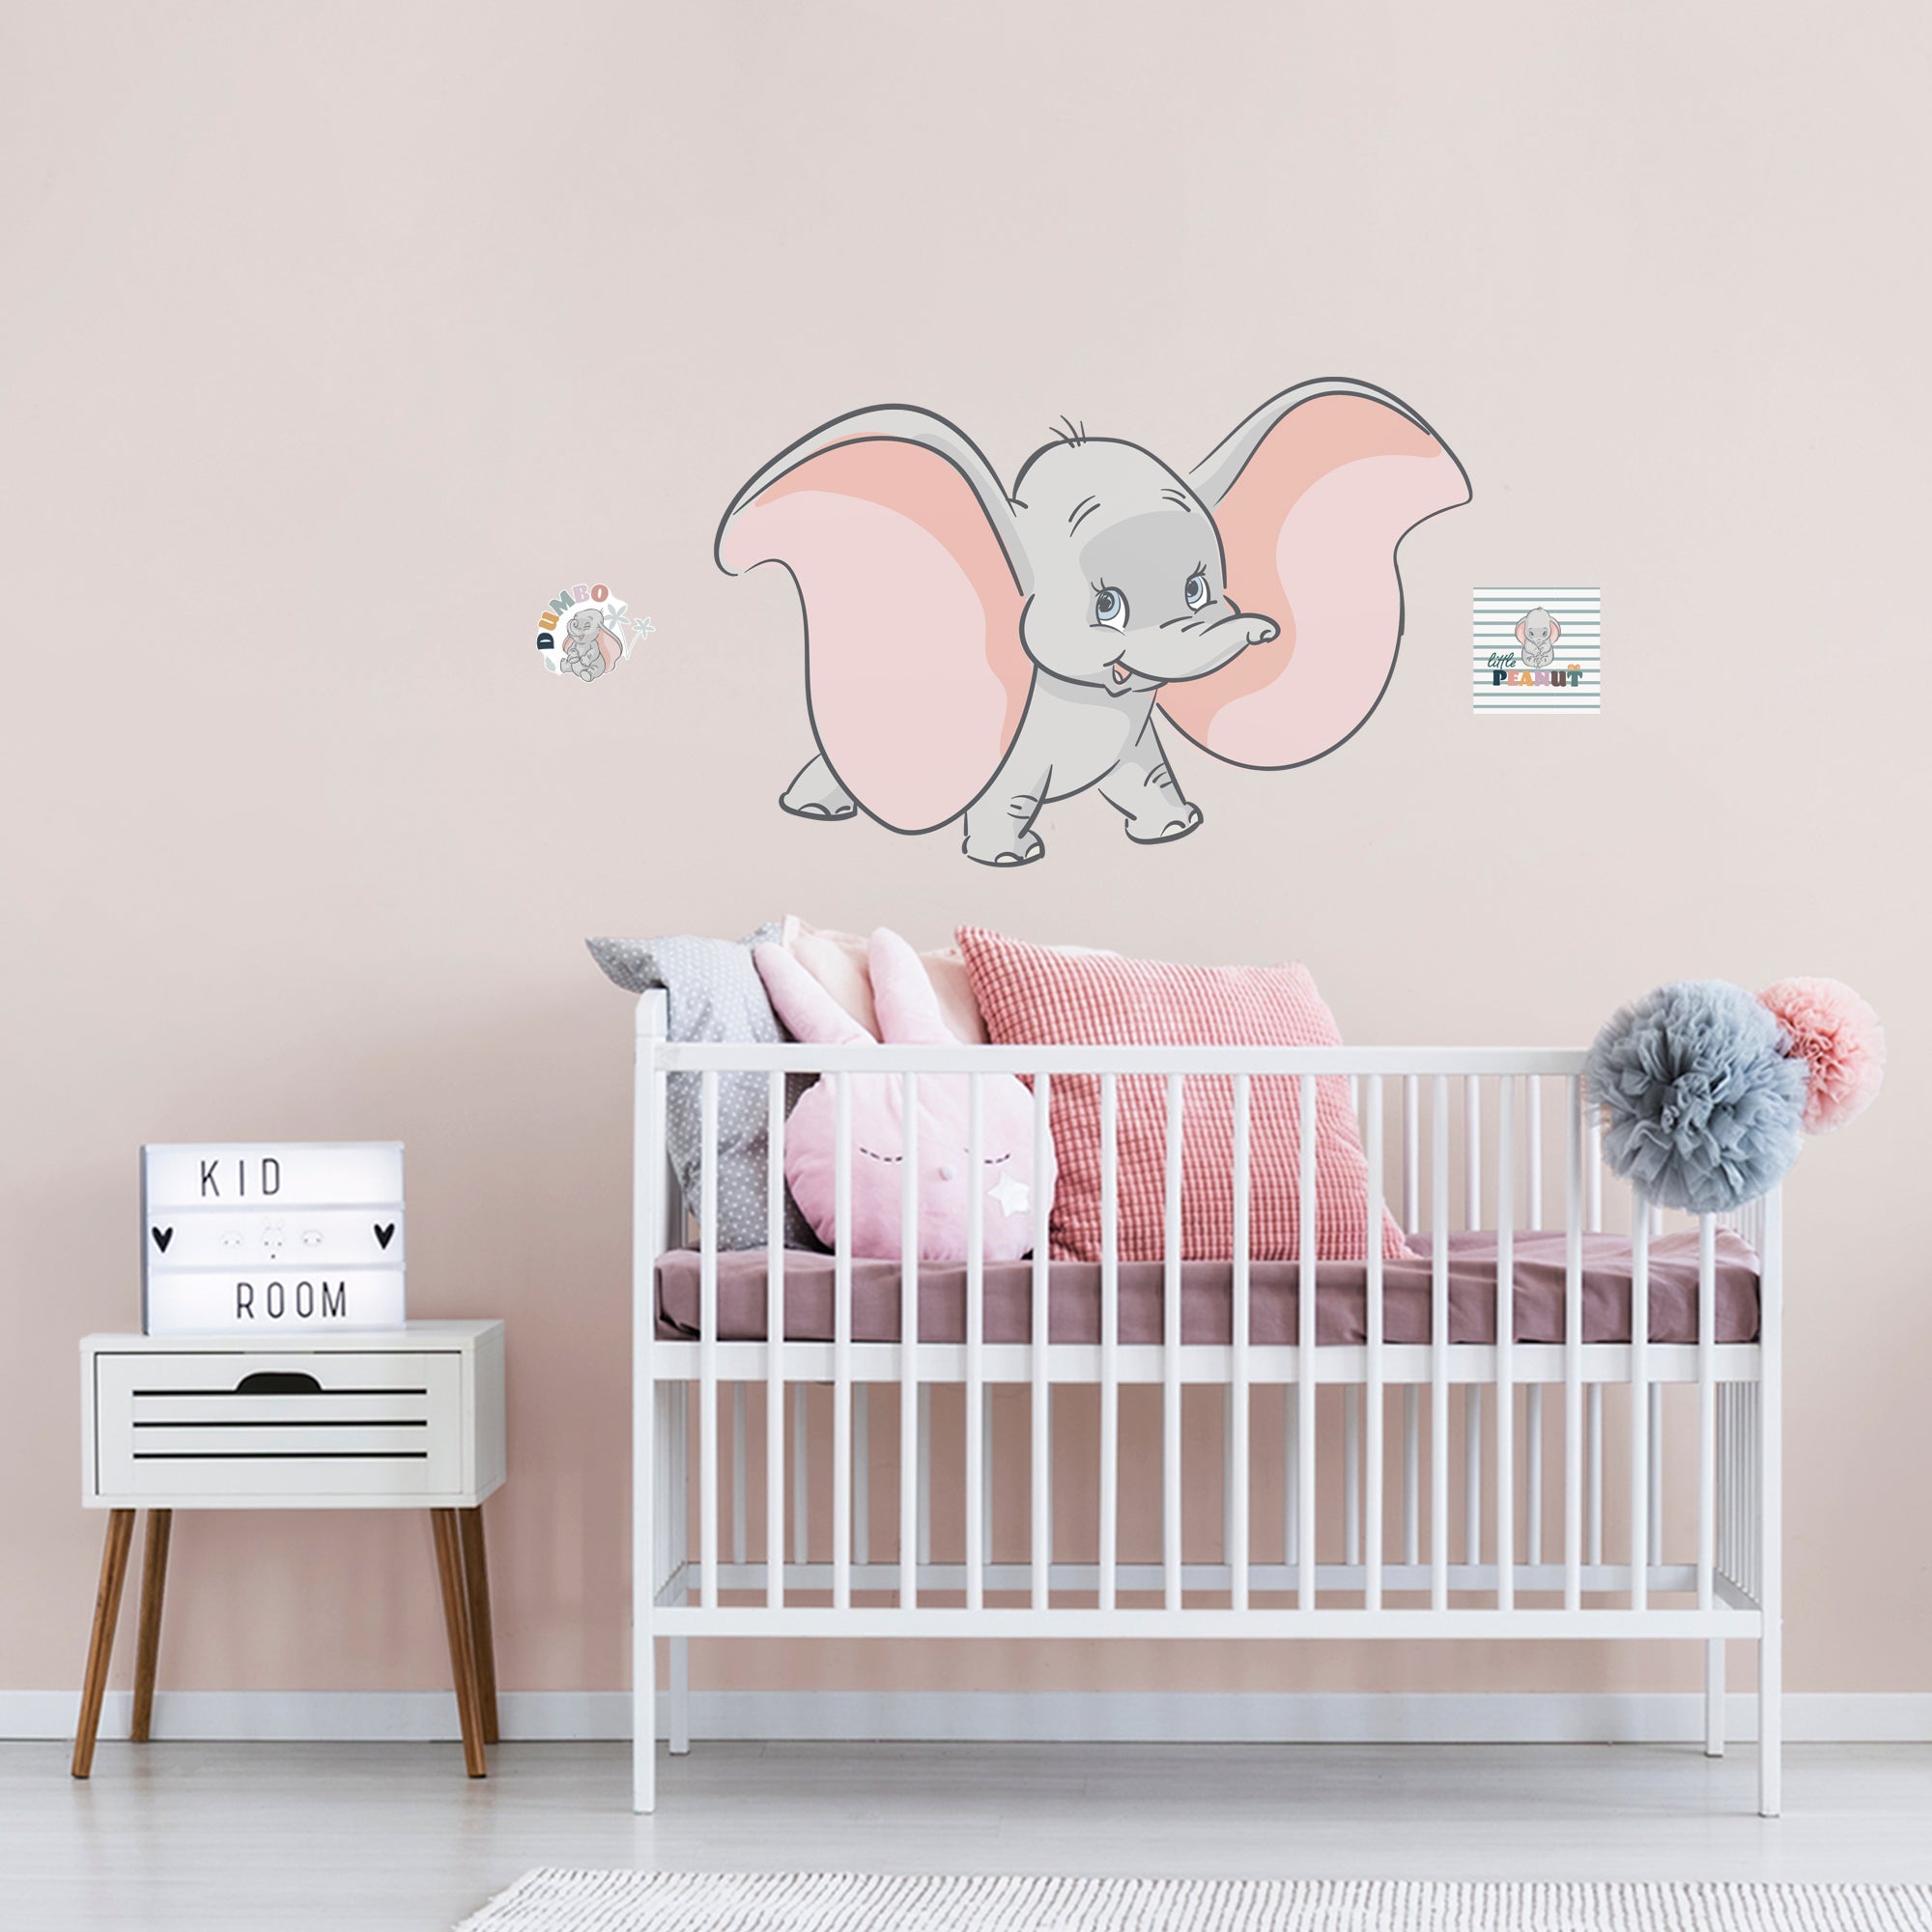 Dumbo Before the Bloom - Officially Licensed Disney Removable Wall Decal XL by Fathead | Vinyl